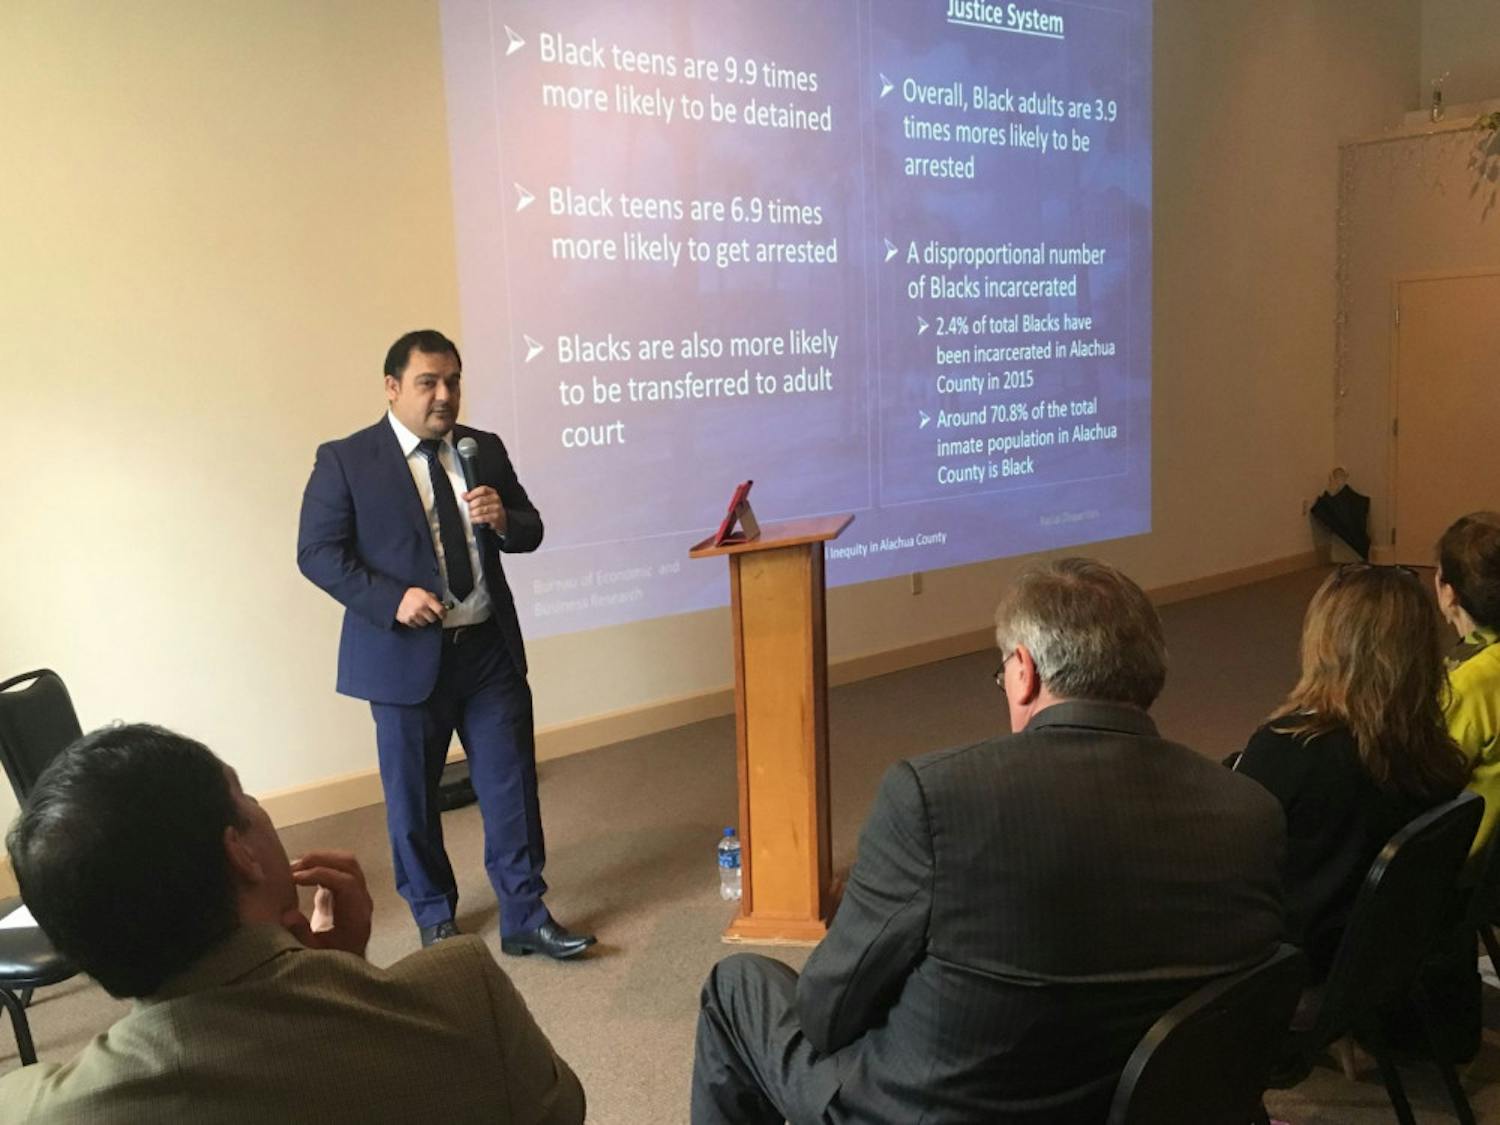 UF assistant professor Hector Hugo Sandoval Gutierrez presents data on racial inequity within the county to an audience of more than 200 Friday afternoon at the Mt. Moriah Missionary Baptist Church, located at 718 SE 11th St.